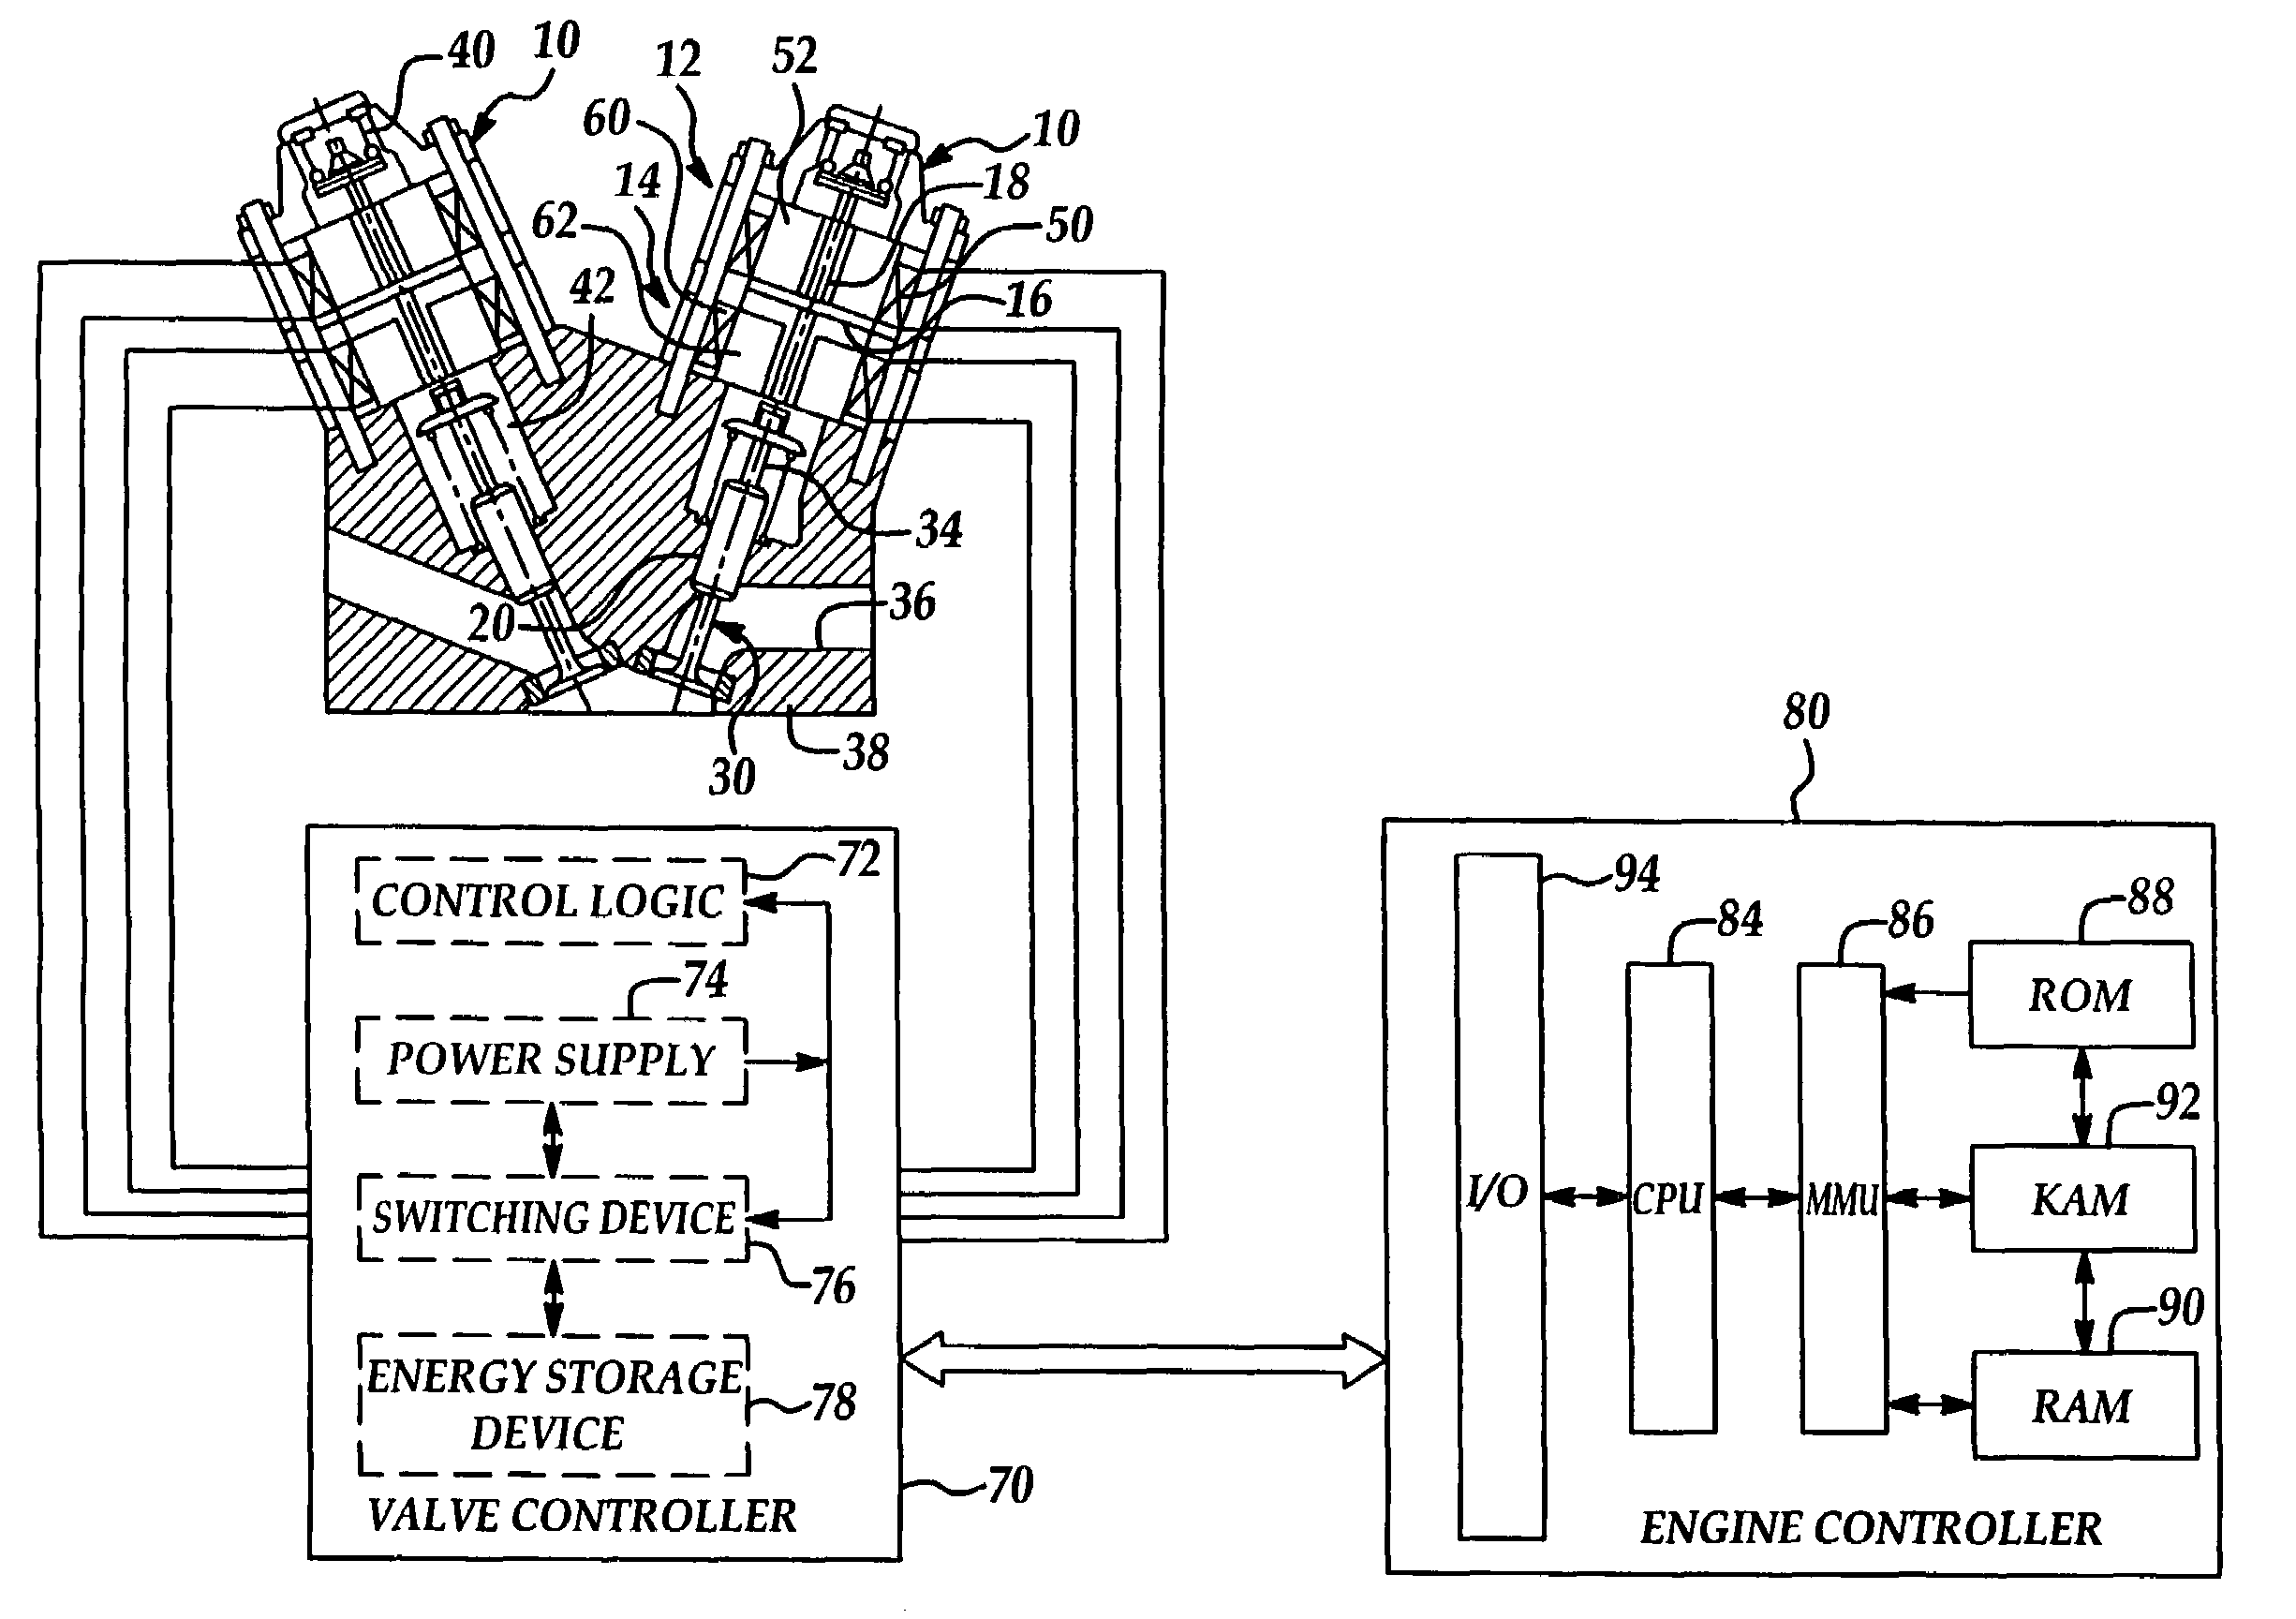 Electromagnetic valve actuation with series connected electromagnet coils